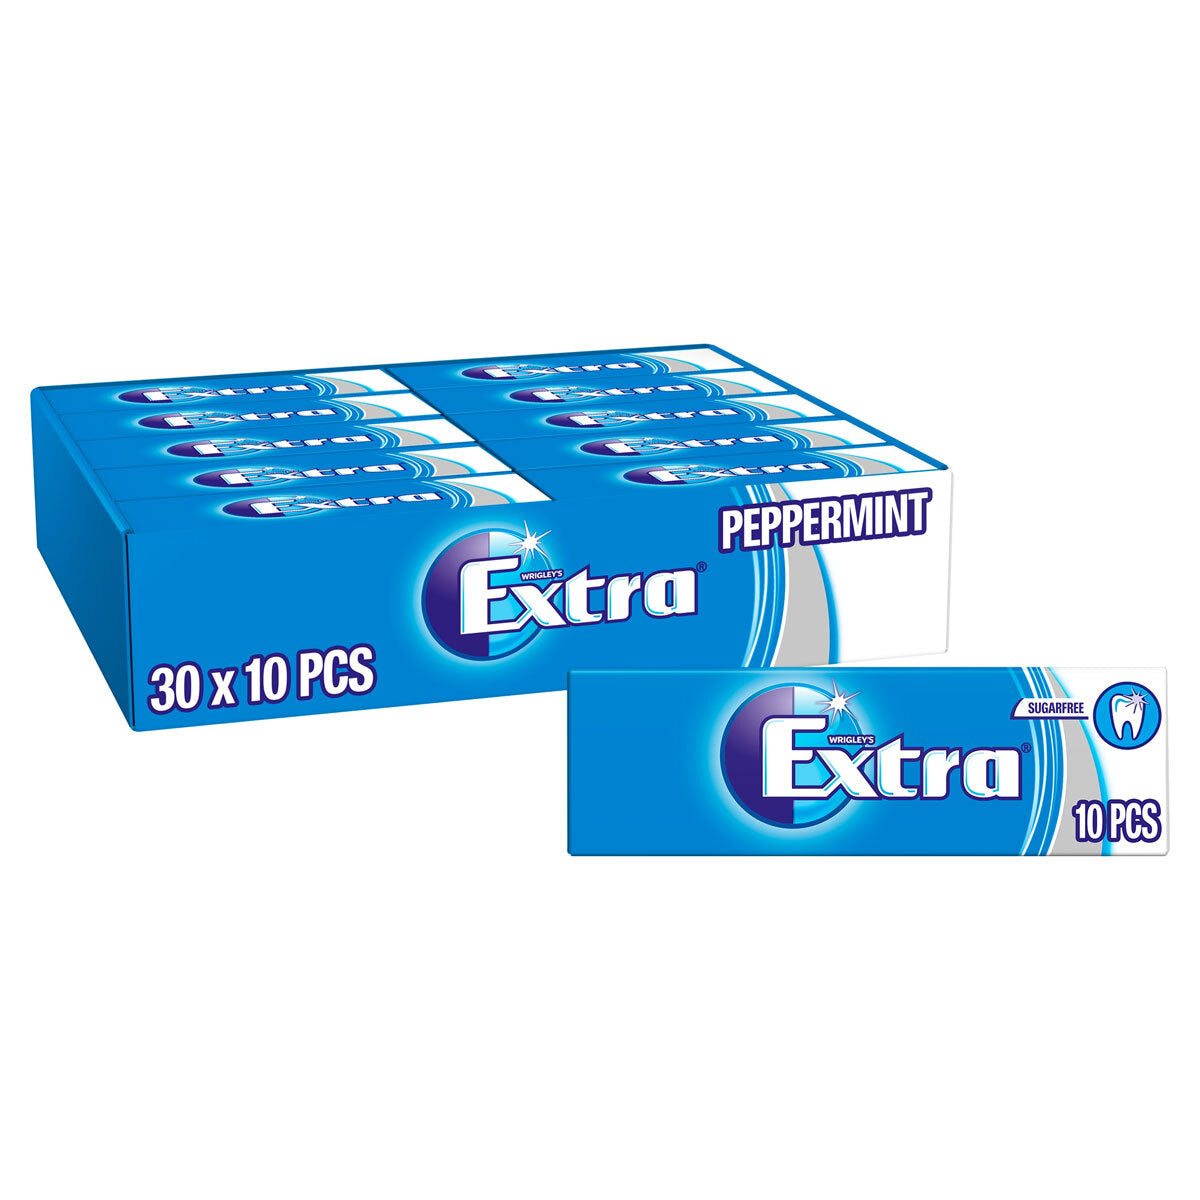 Wrigley's Extra Peppermint Chewing Gum, 30 x 10 Pack Snacks Costco UK Packs  